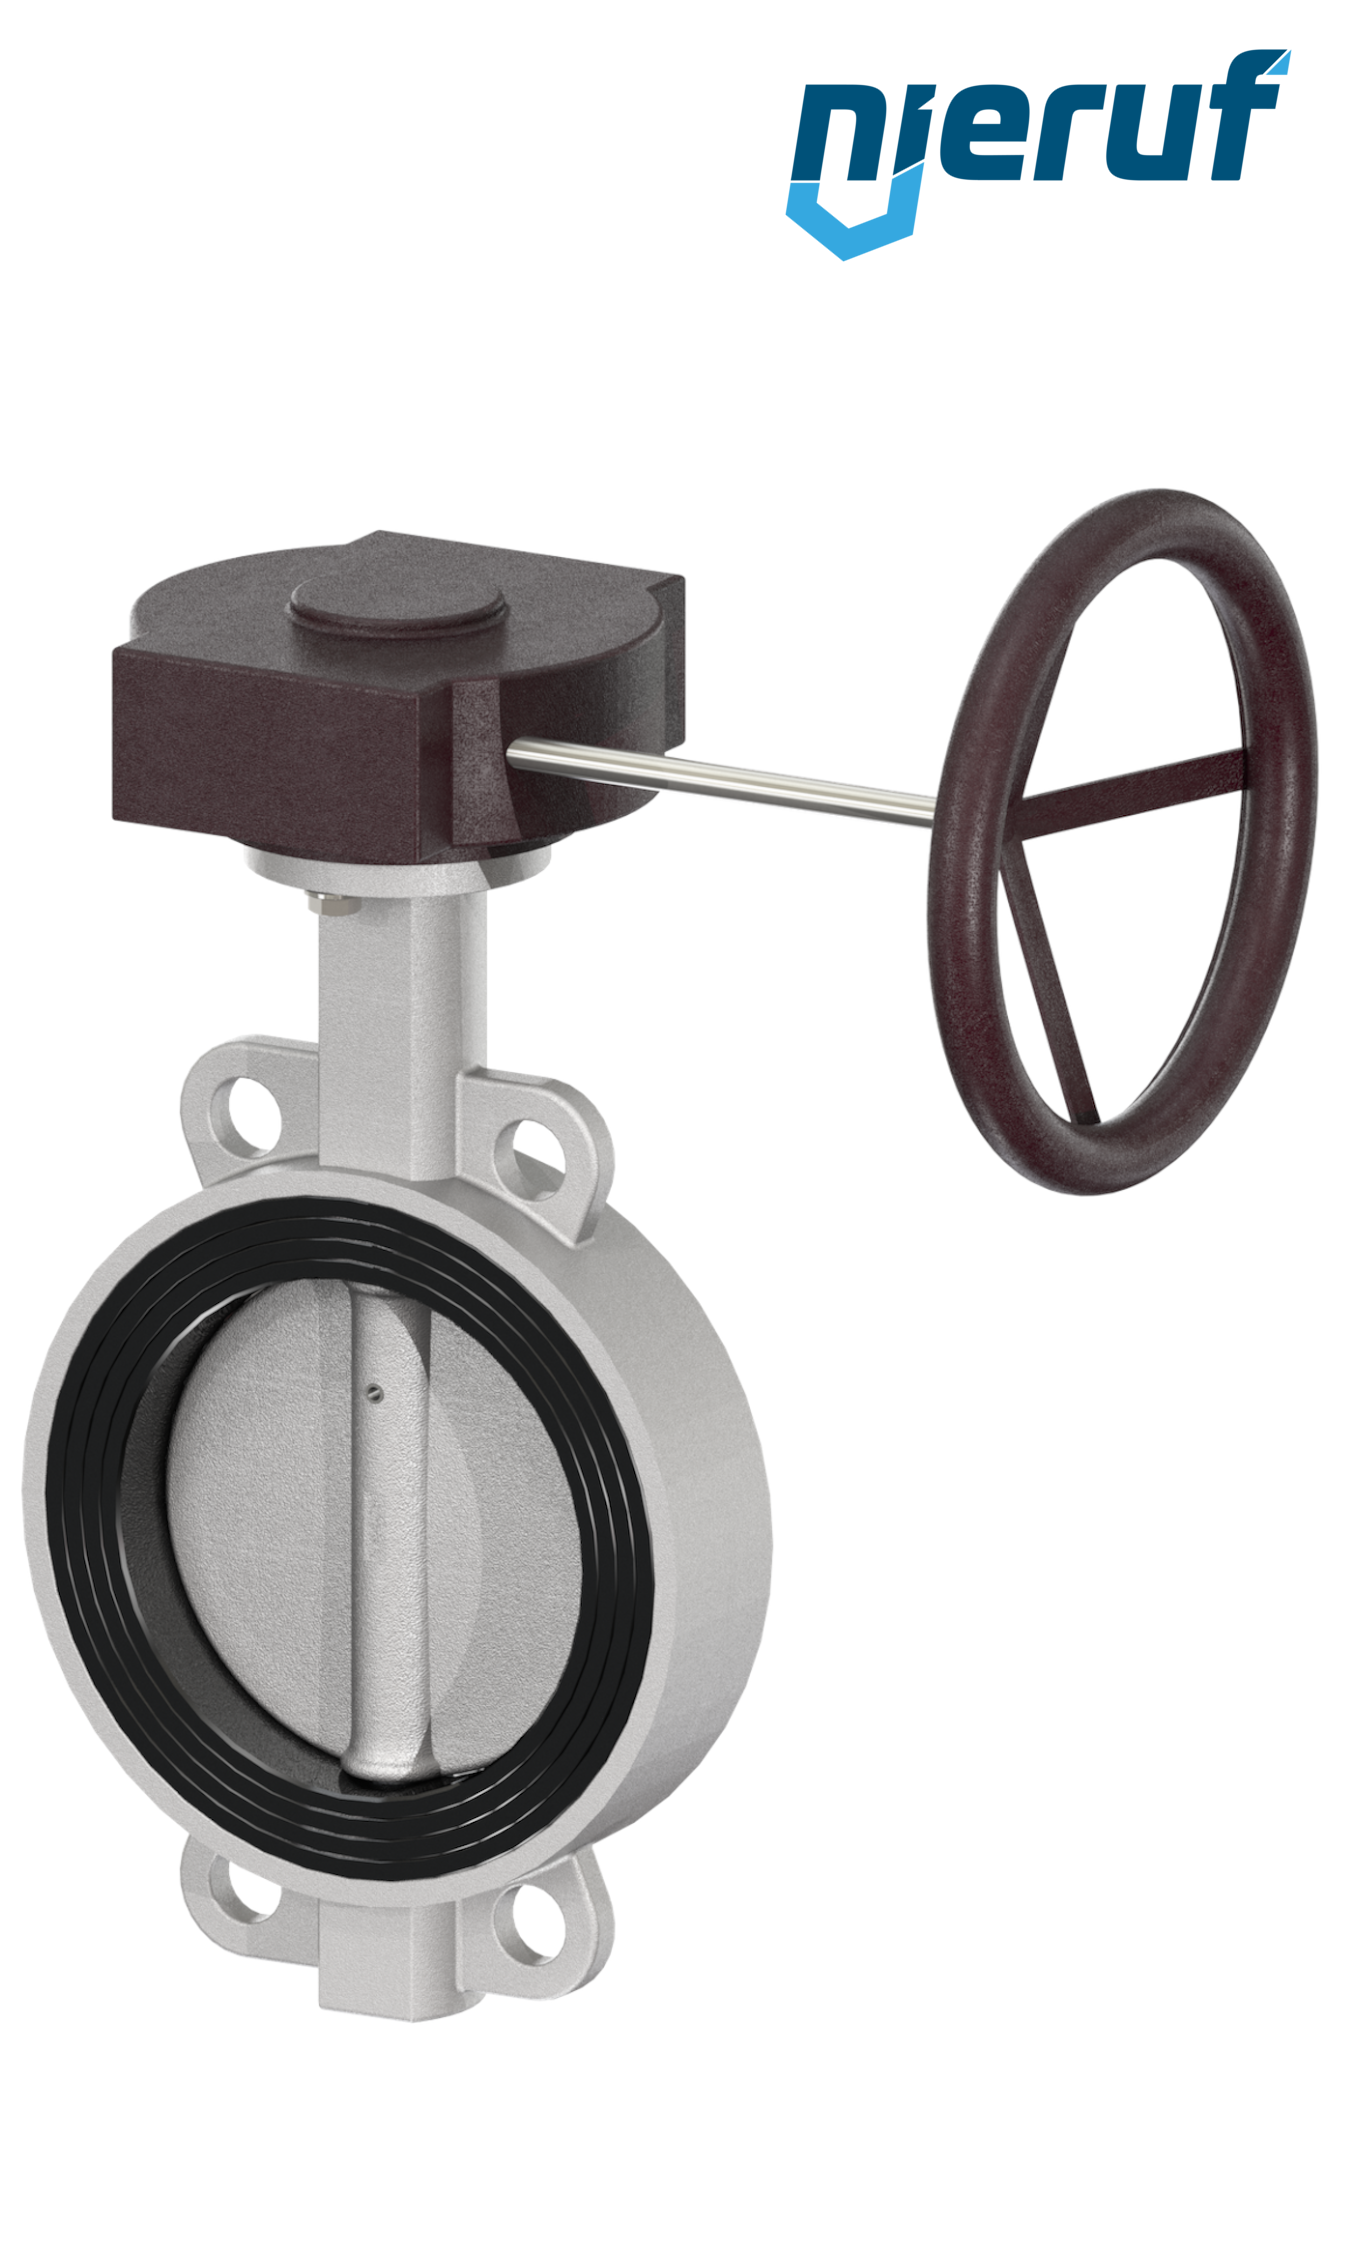 Butterfly-valve-stainless-steel DN 200 PN16 AK08 EPDM gearbox